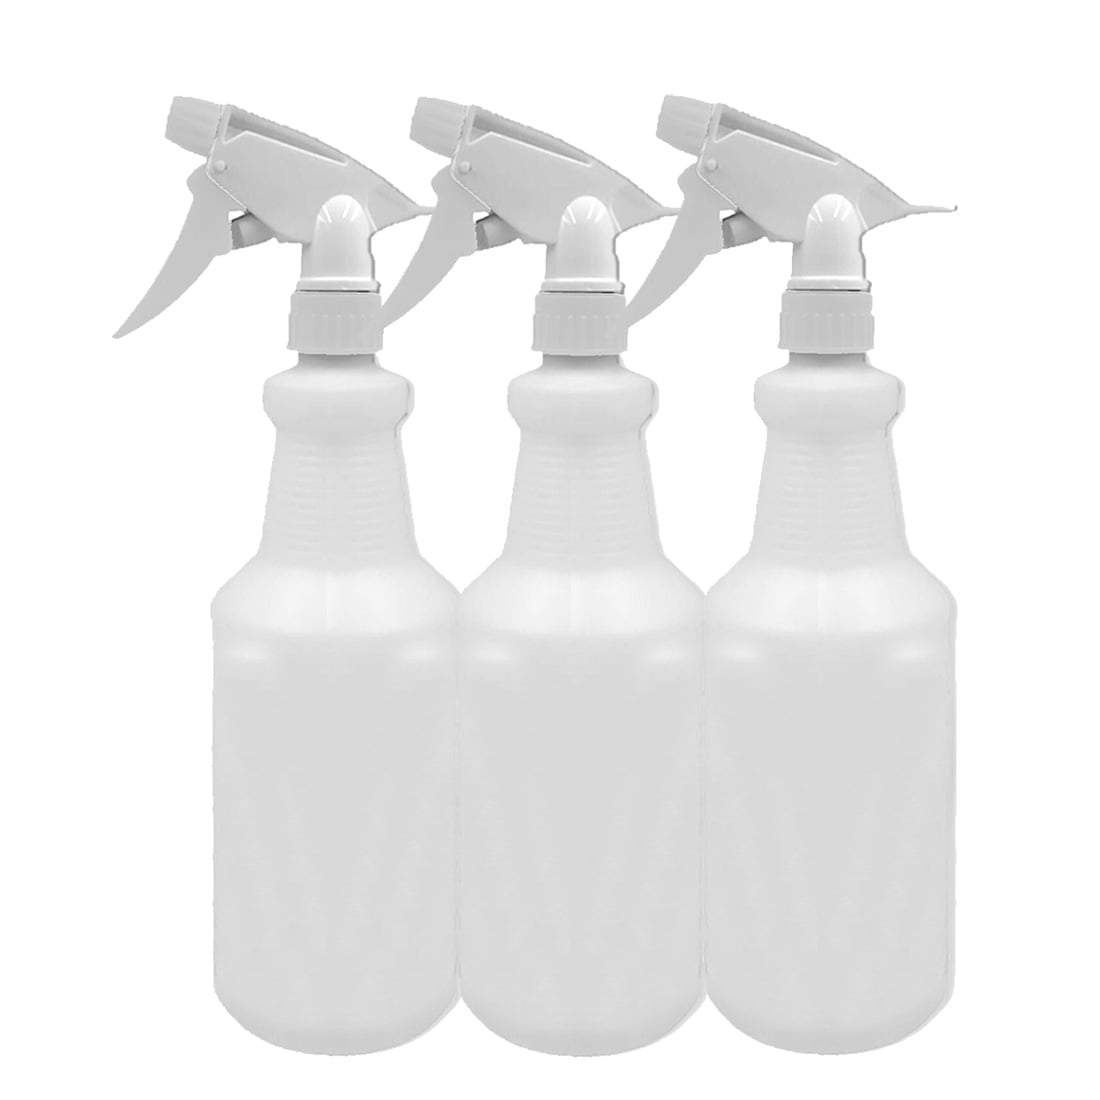 All Directions Pack of 2-1L, Frost with Full Blue Press Spray Upside Down Spray Plastic Bottle PLASTIFIC Empty Spray Bottle for Cleaning and Gardening Refillable Durable Trigger Sprayer